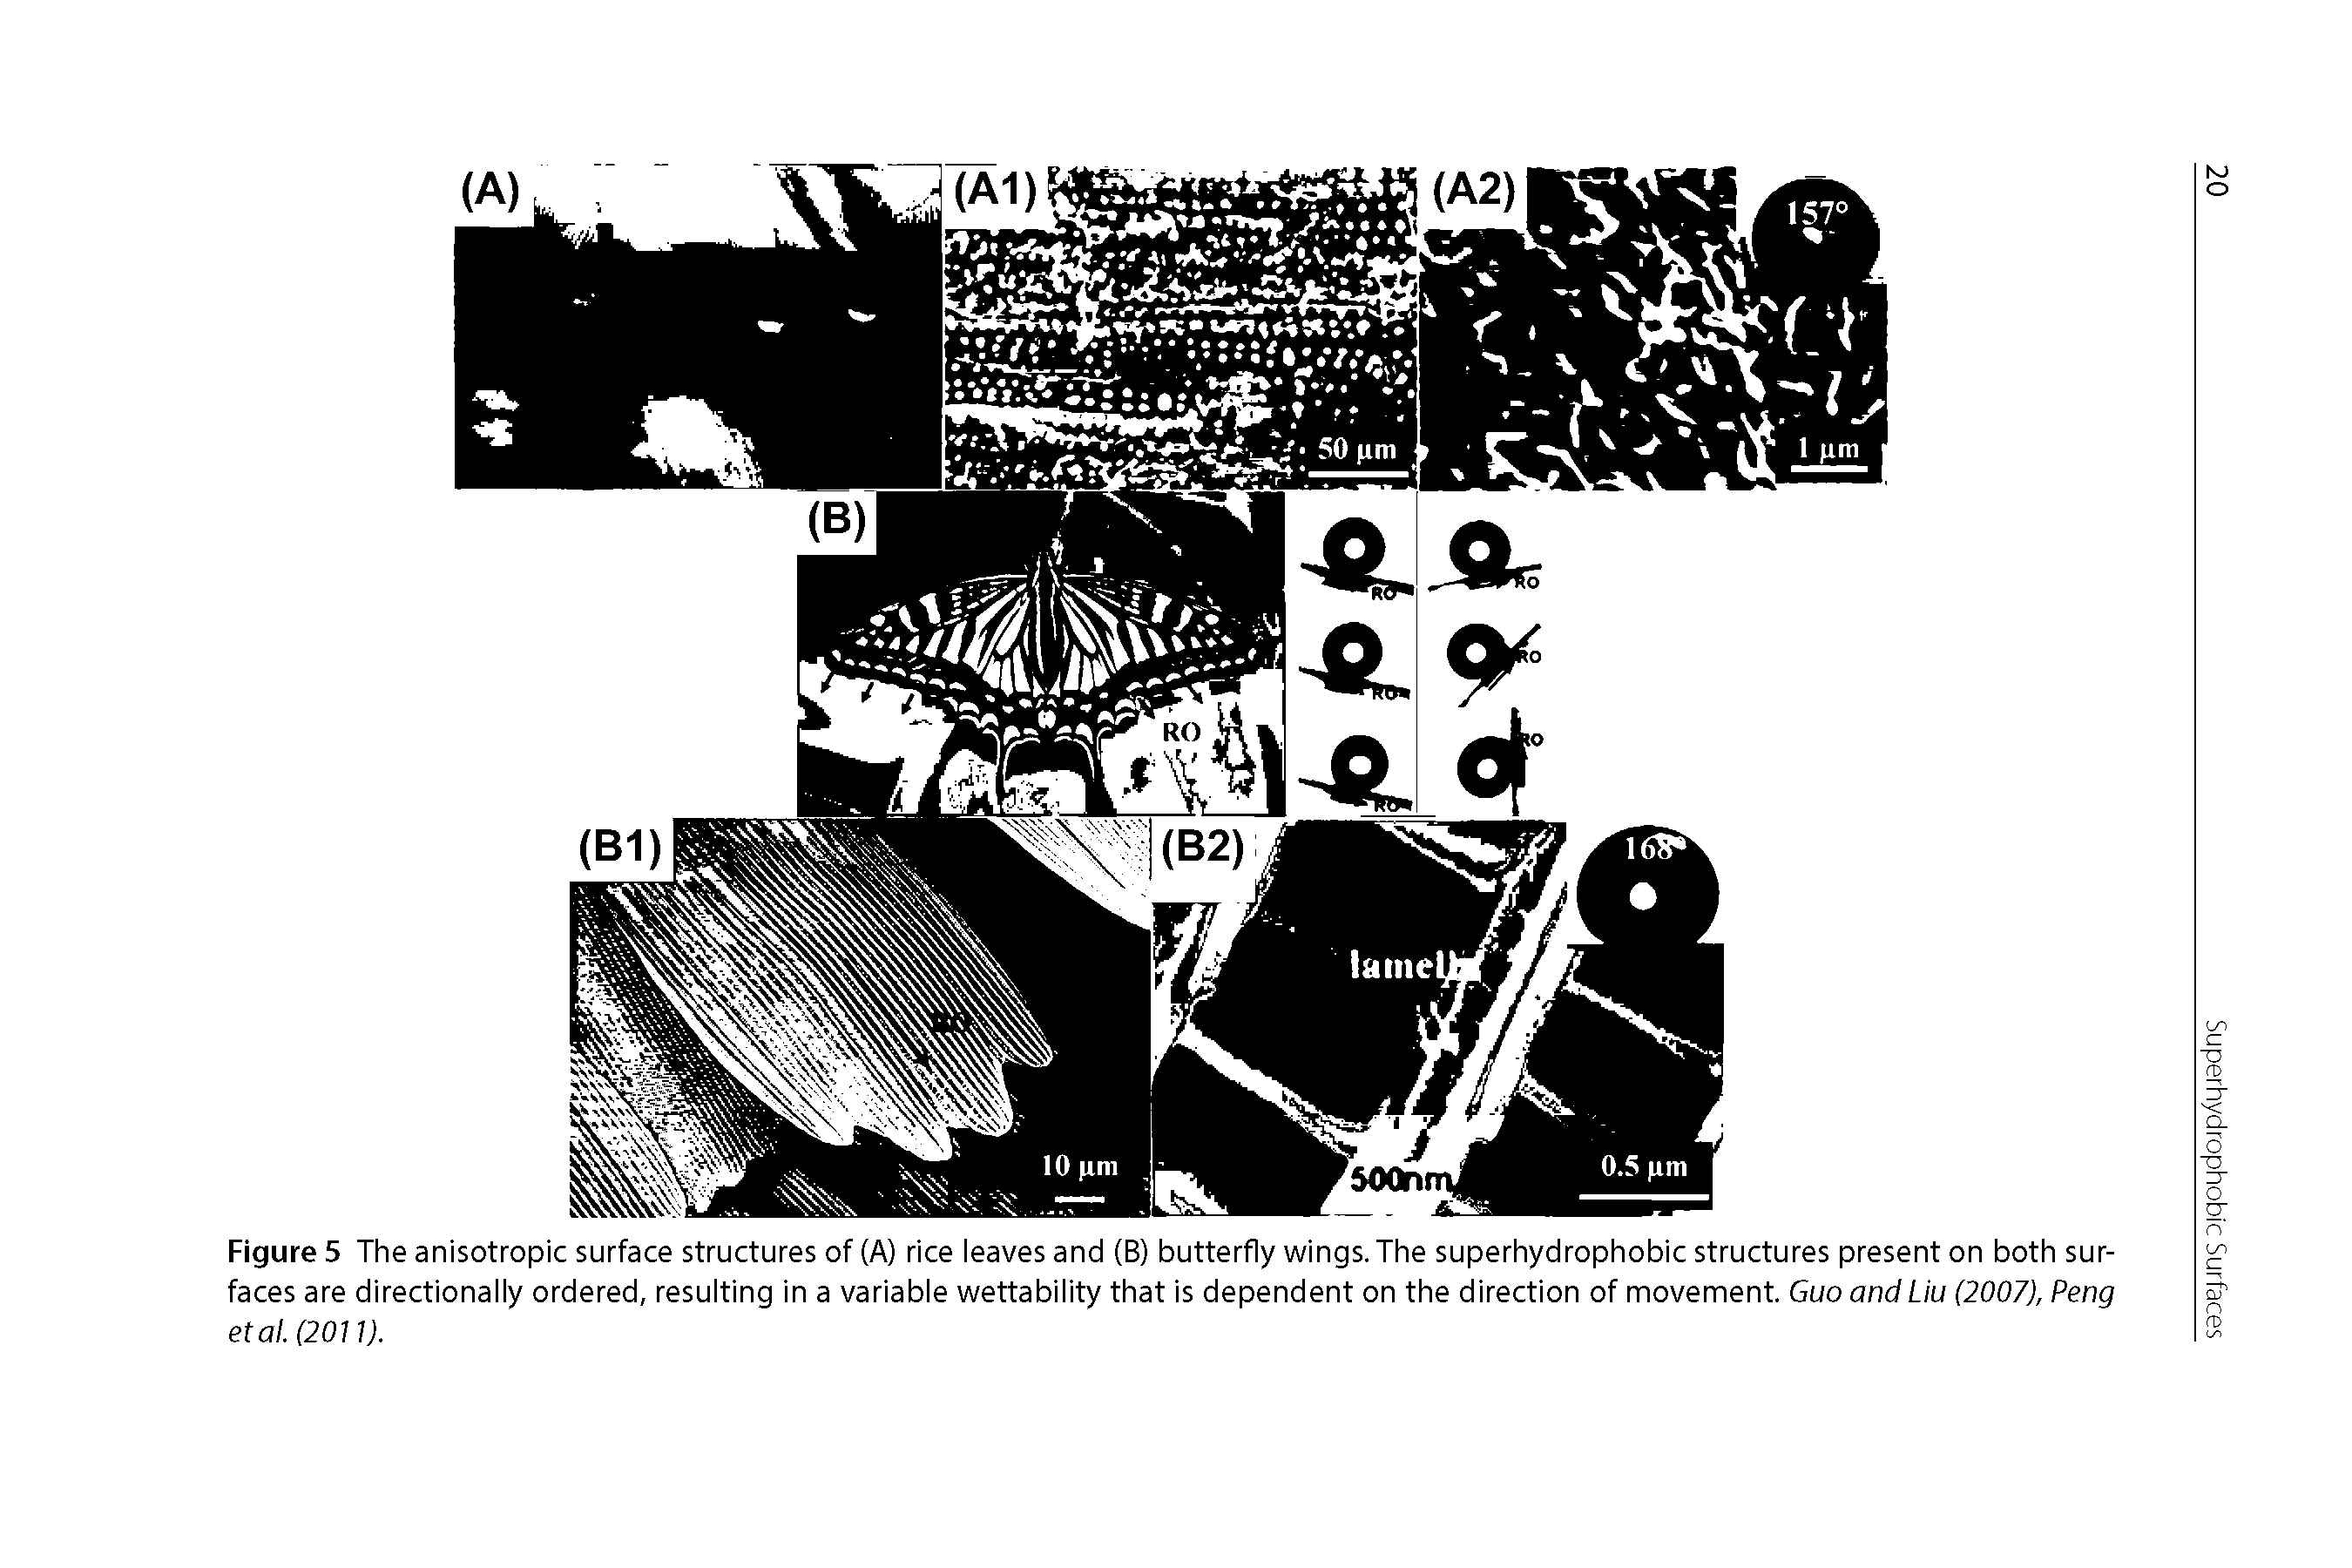 Figure 5 The anisotropic surface structures of (A) rice leaves and (B) butterfly wings. The superhydrophobic structures present on both surfaces are directionally ordered, resulting in a variable wettability that is dependent on the direction of movement. Guo and Liu (2007), Peng etal.(2011).